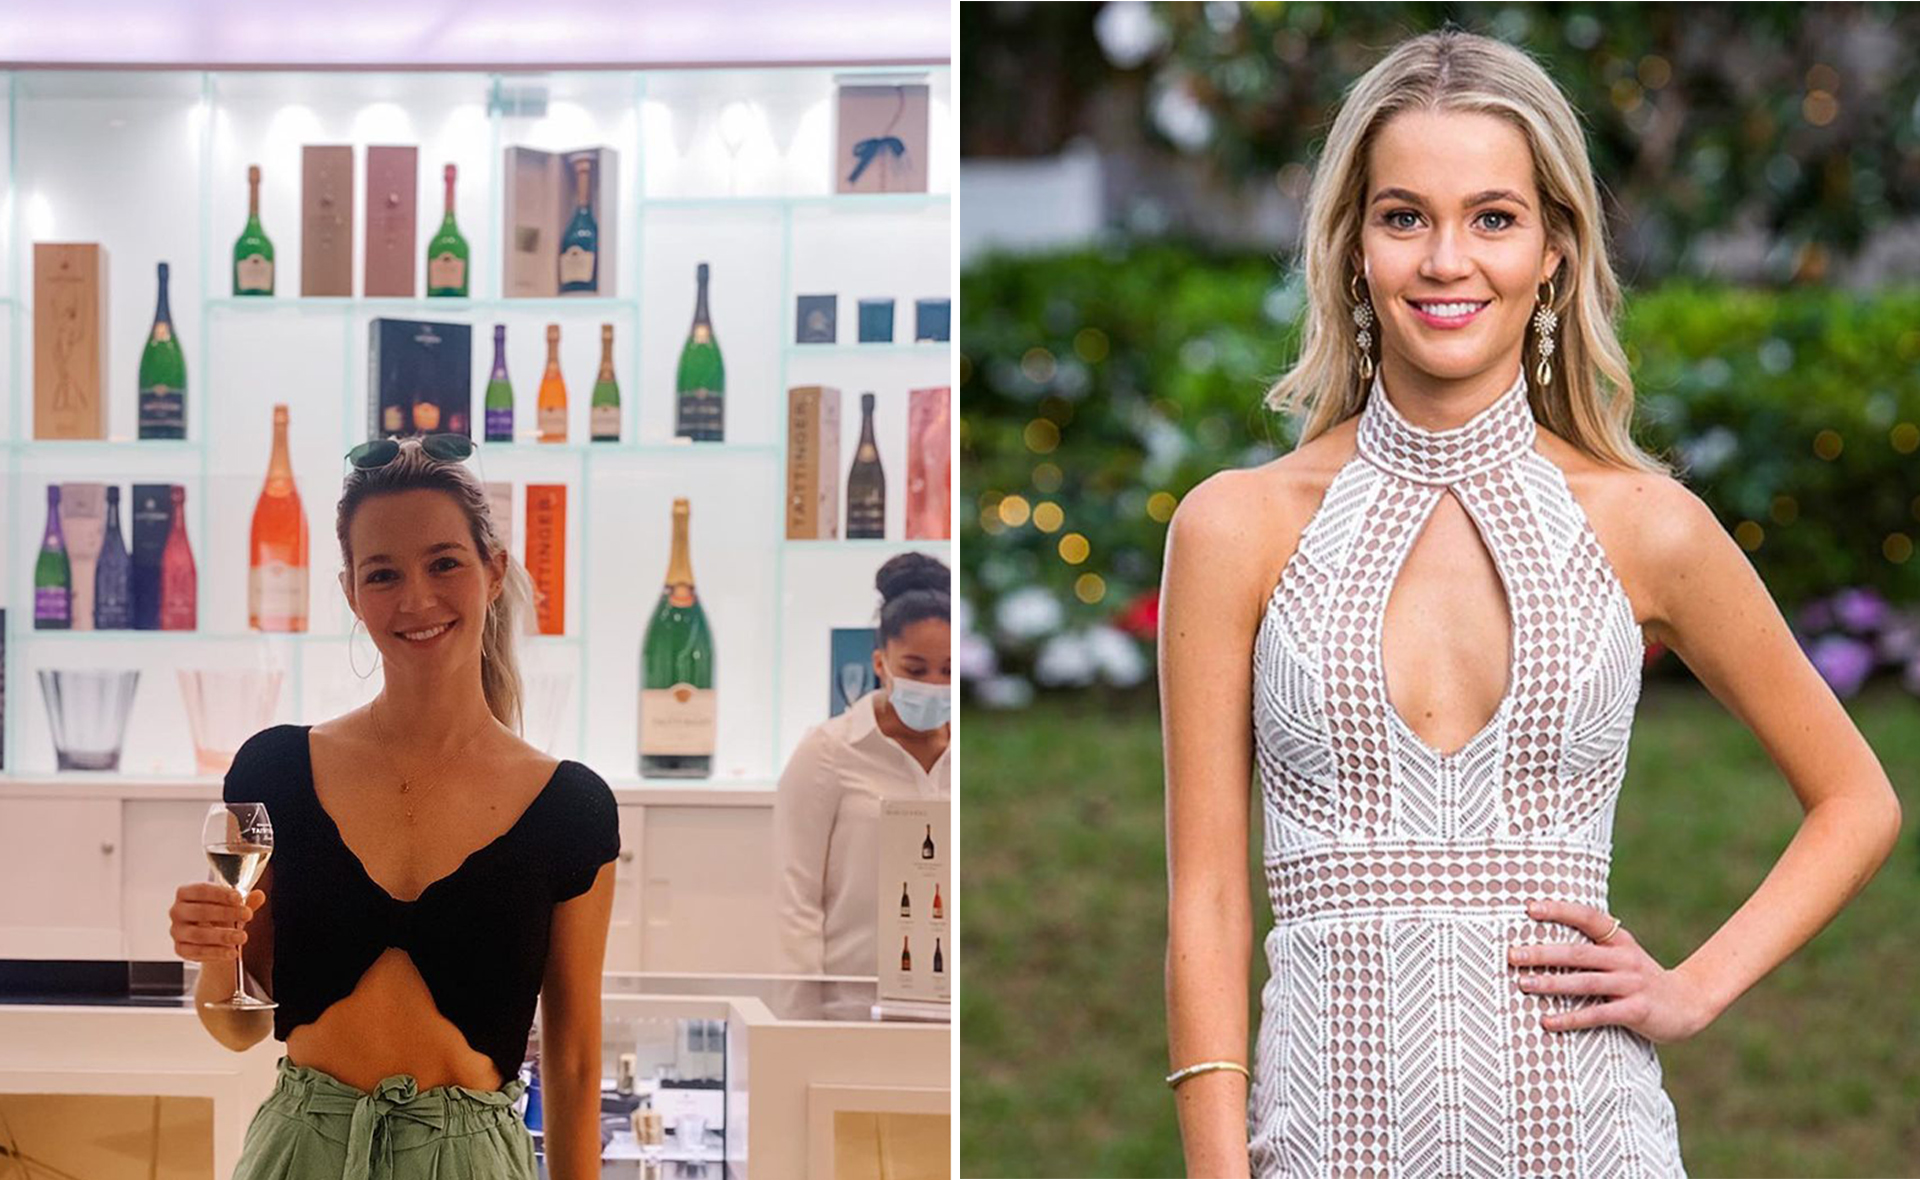 “It brought out a side to me that I didn’t like”: Former Bachelor star Helena Sauzier reveals why she quit drinking